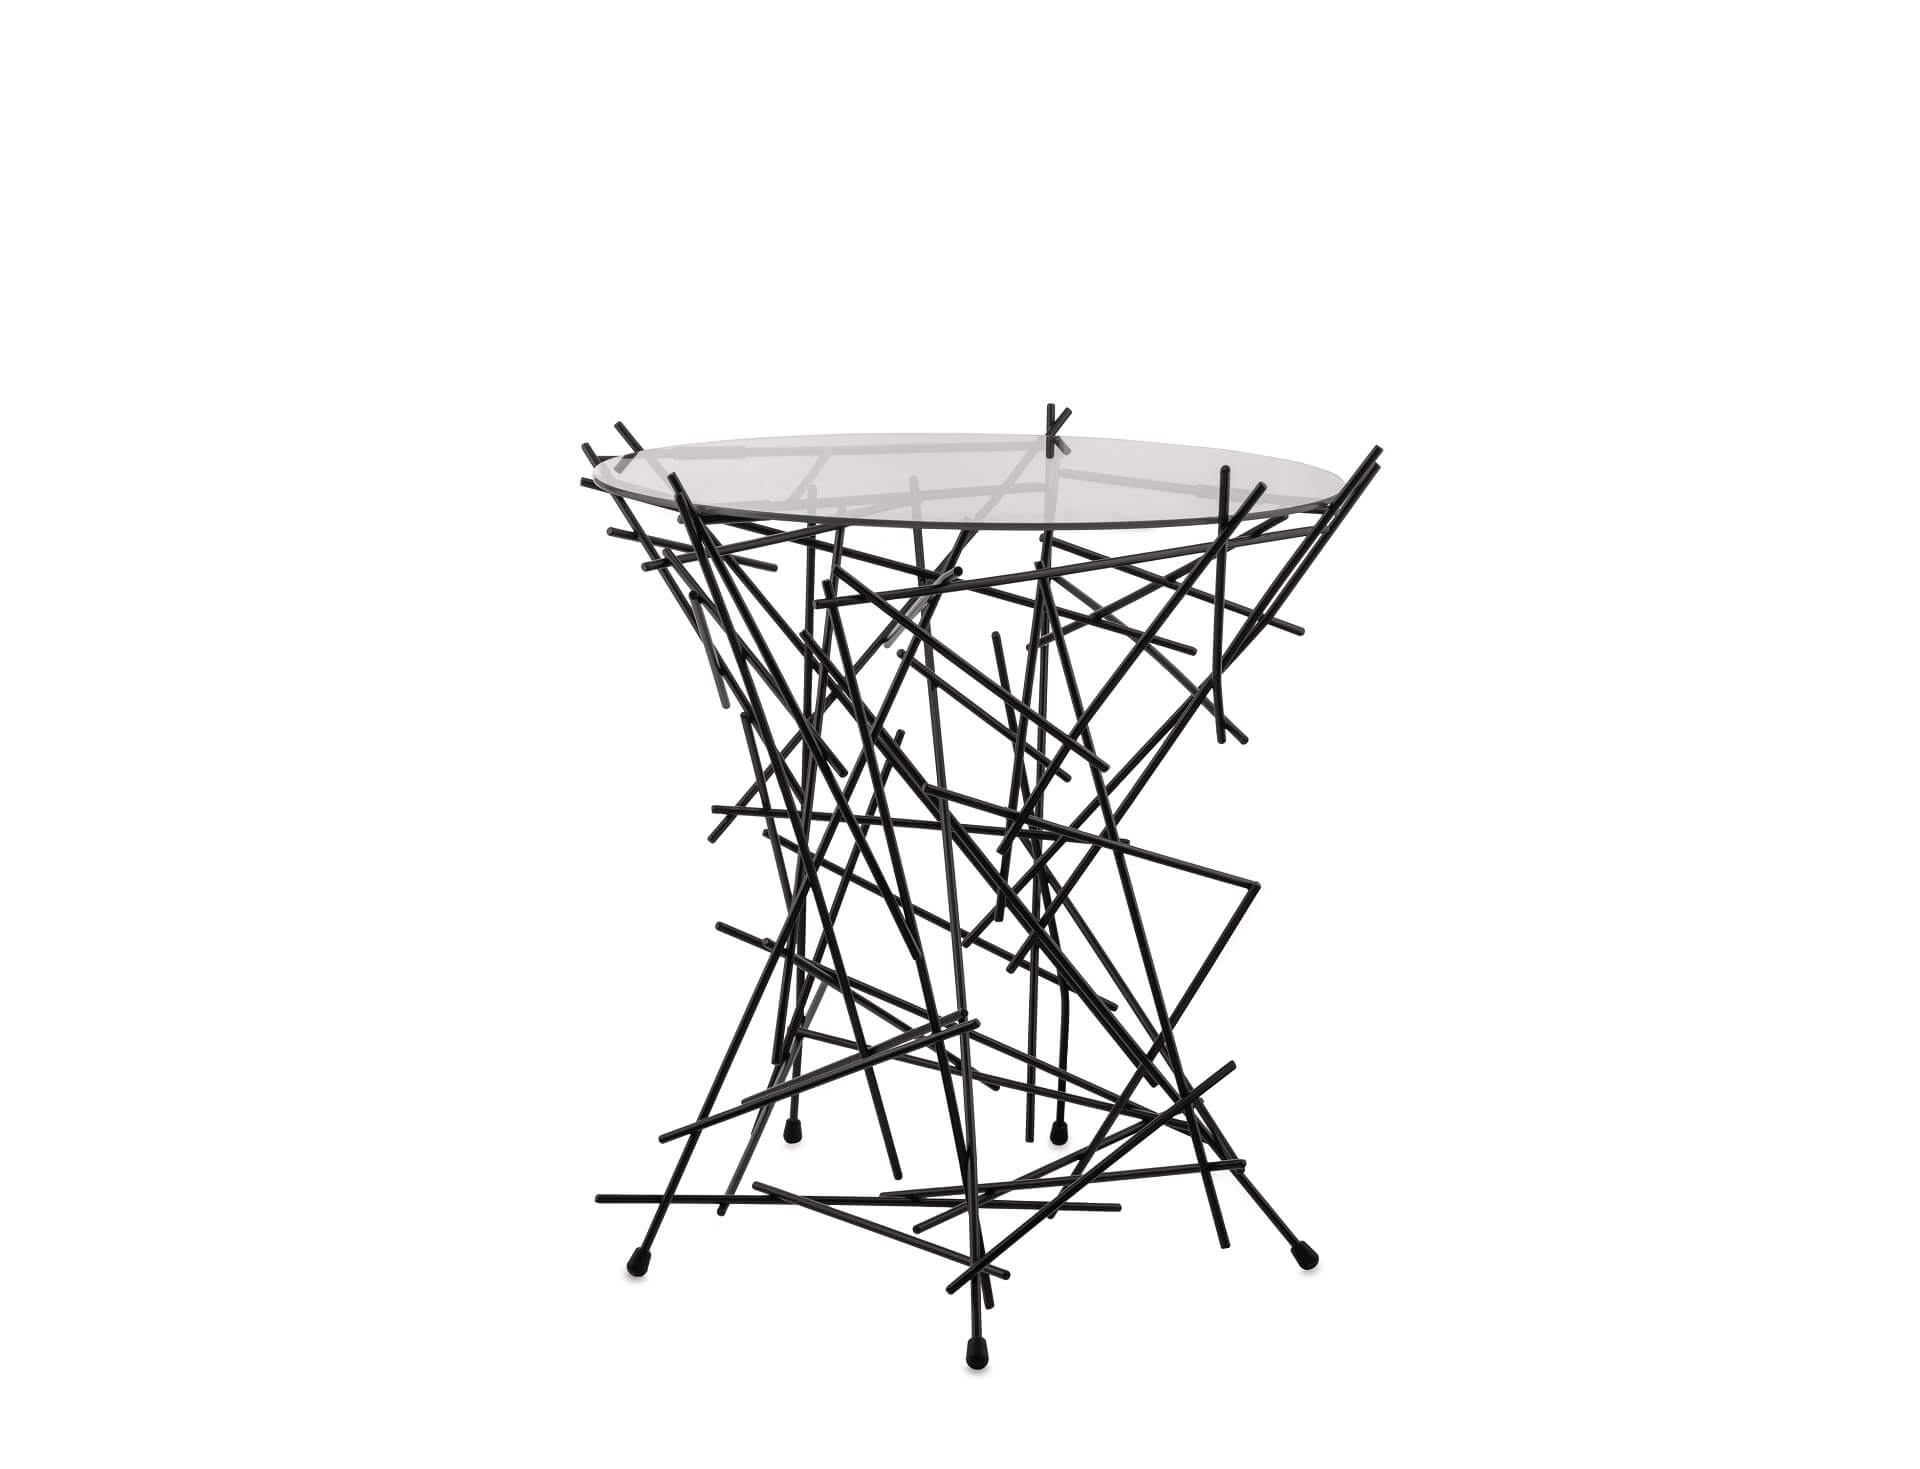 Alessi_Blow-up Small Table